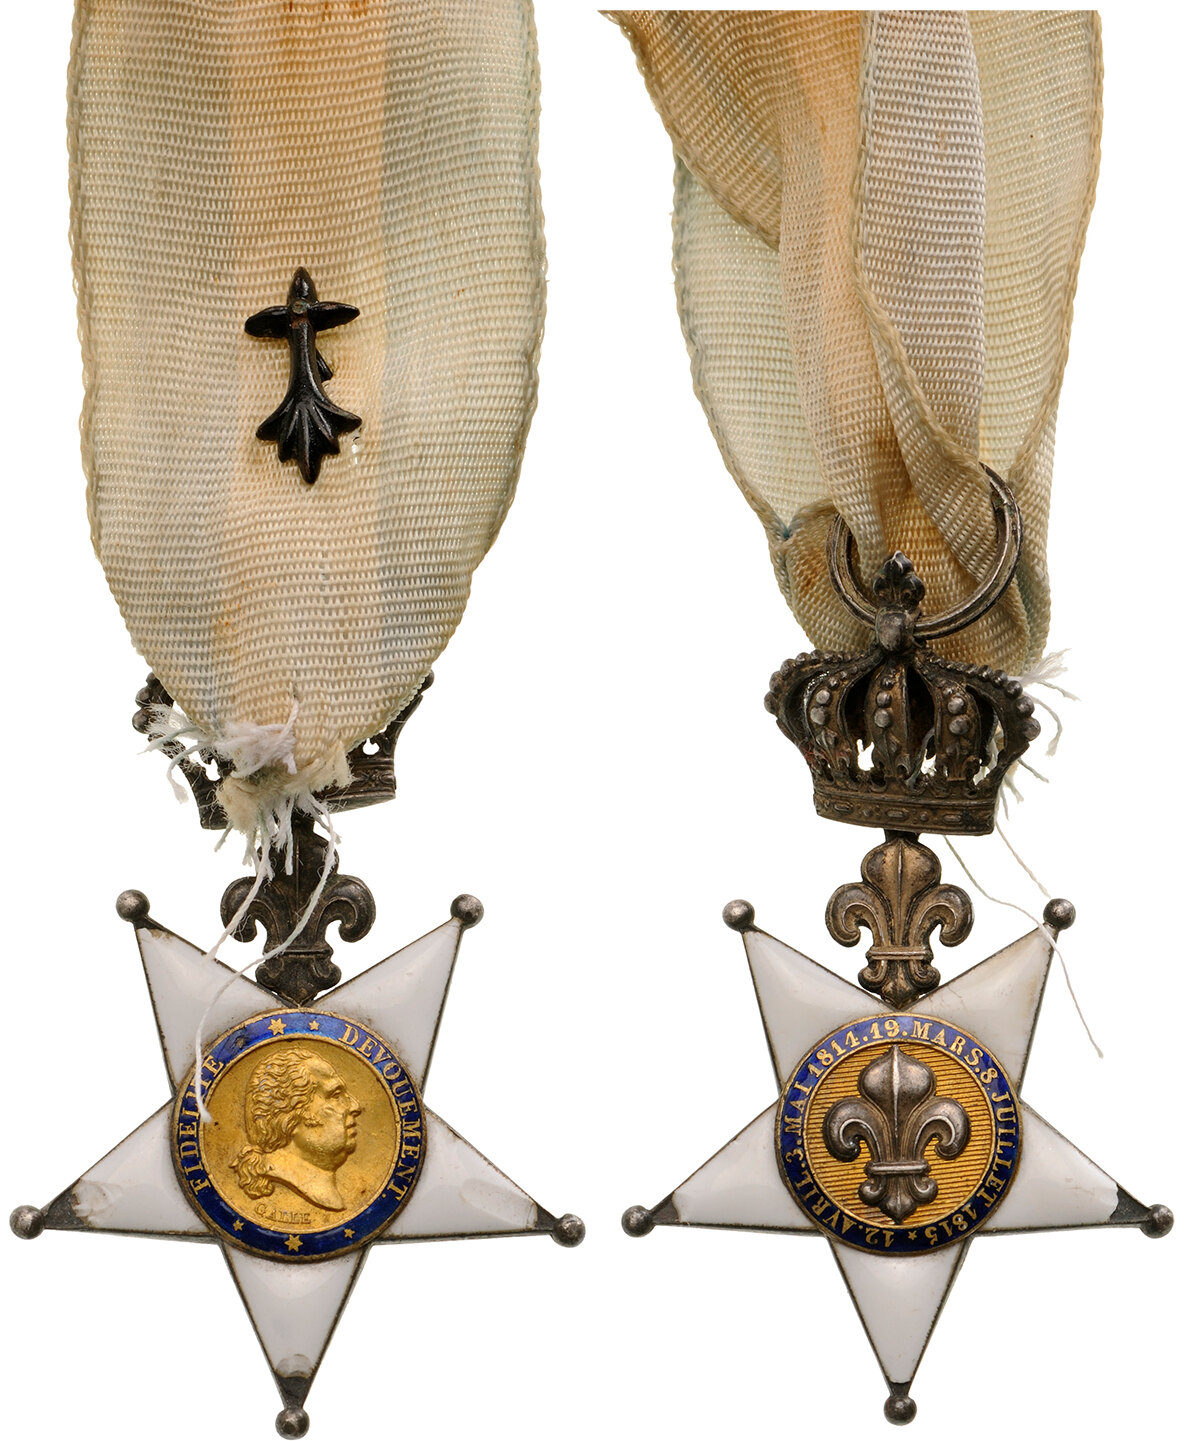 DECORATION OF THE LILY FOR THE NATIONAL GUARD OF PARIS, instituted in 1814 - Image 2 of 2